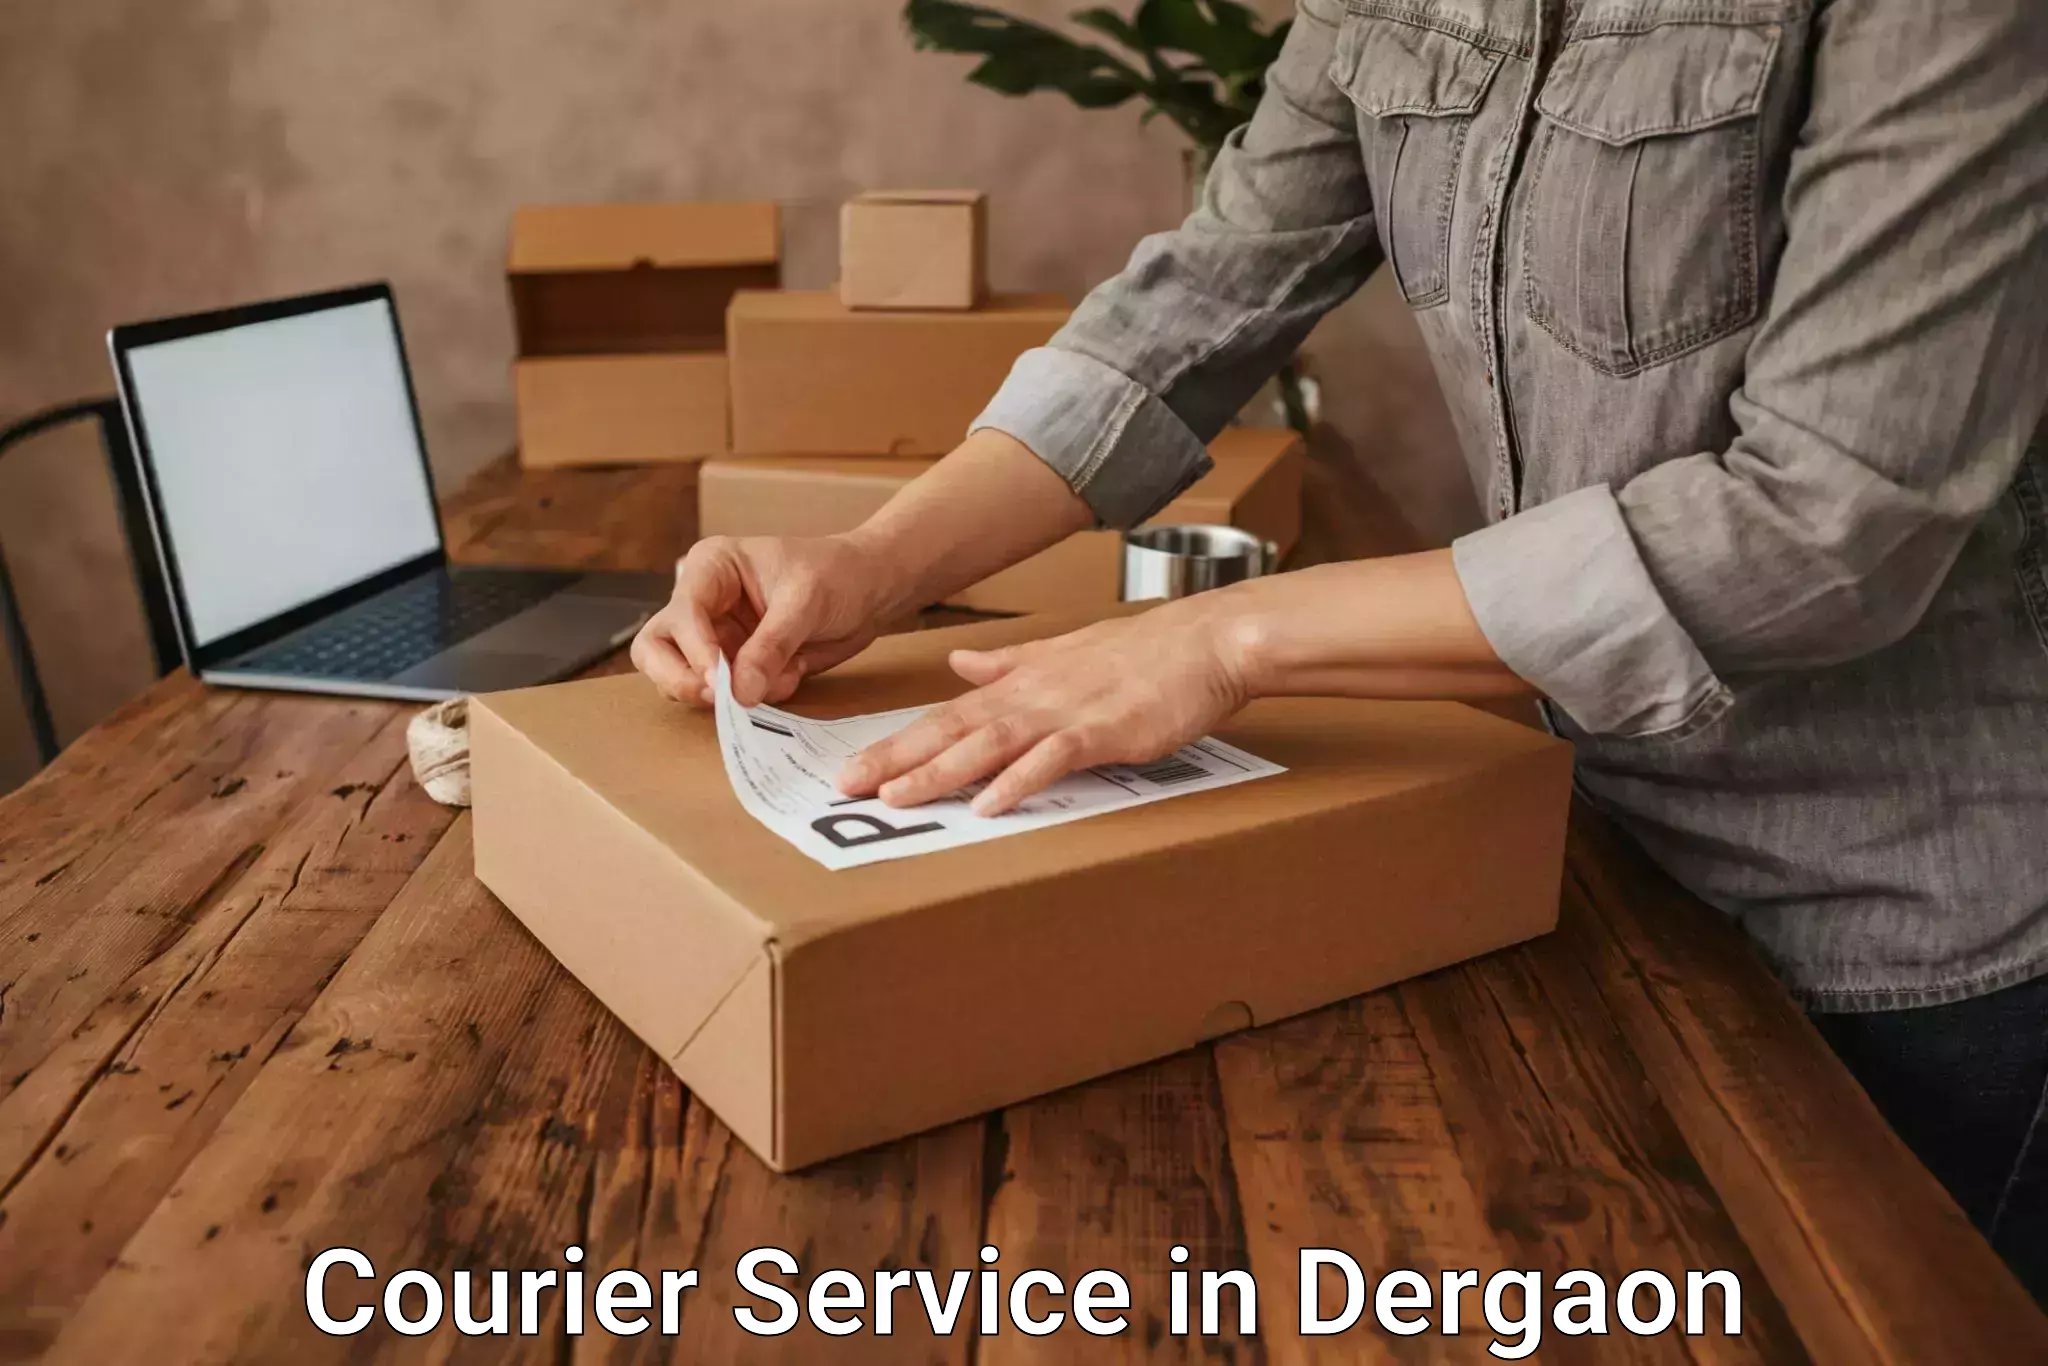 Multi-service courier options in Dergaon